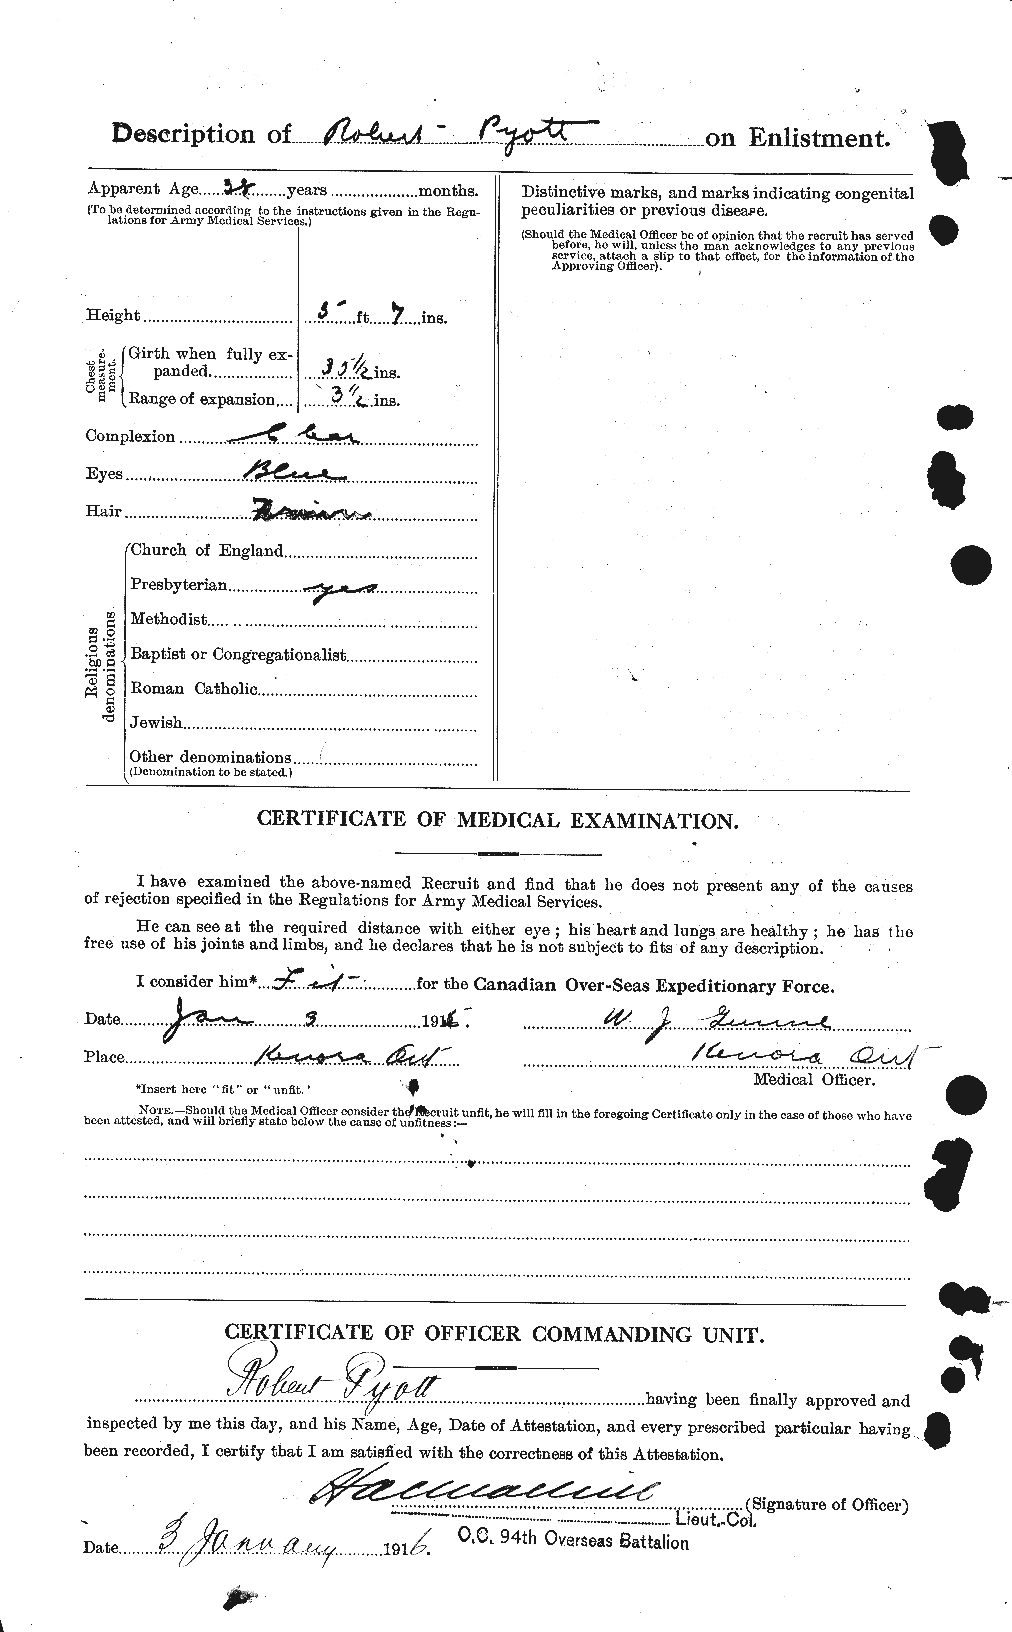 Personnel Records of the First World War - CEF 592024b